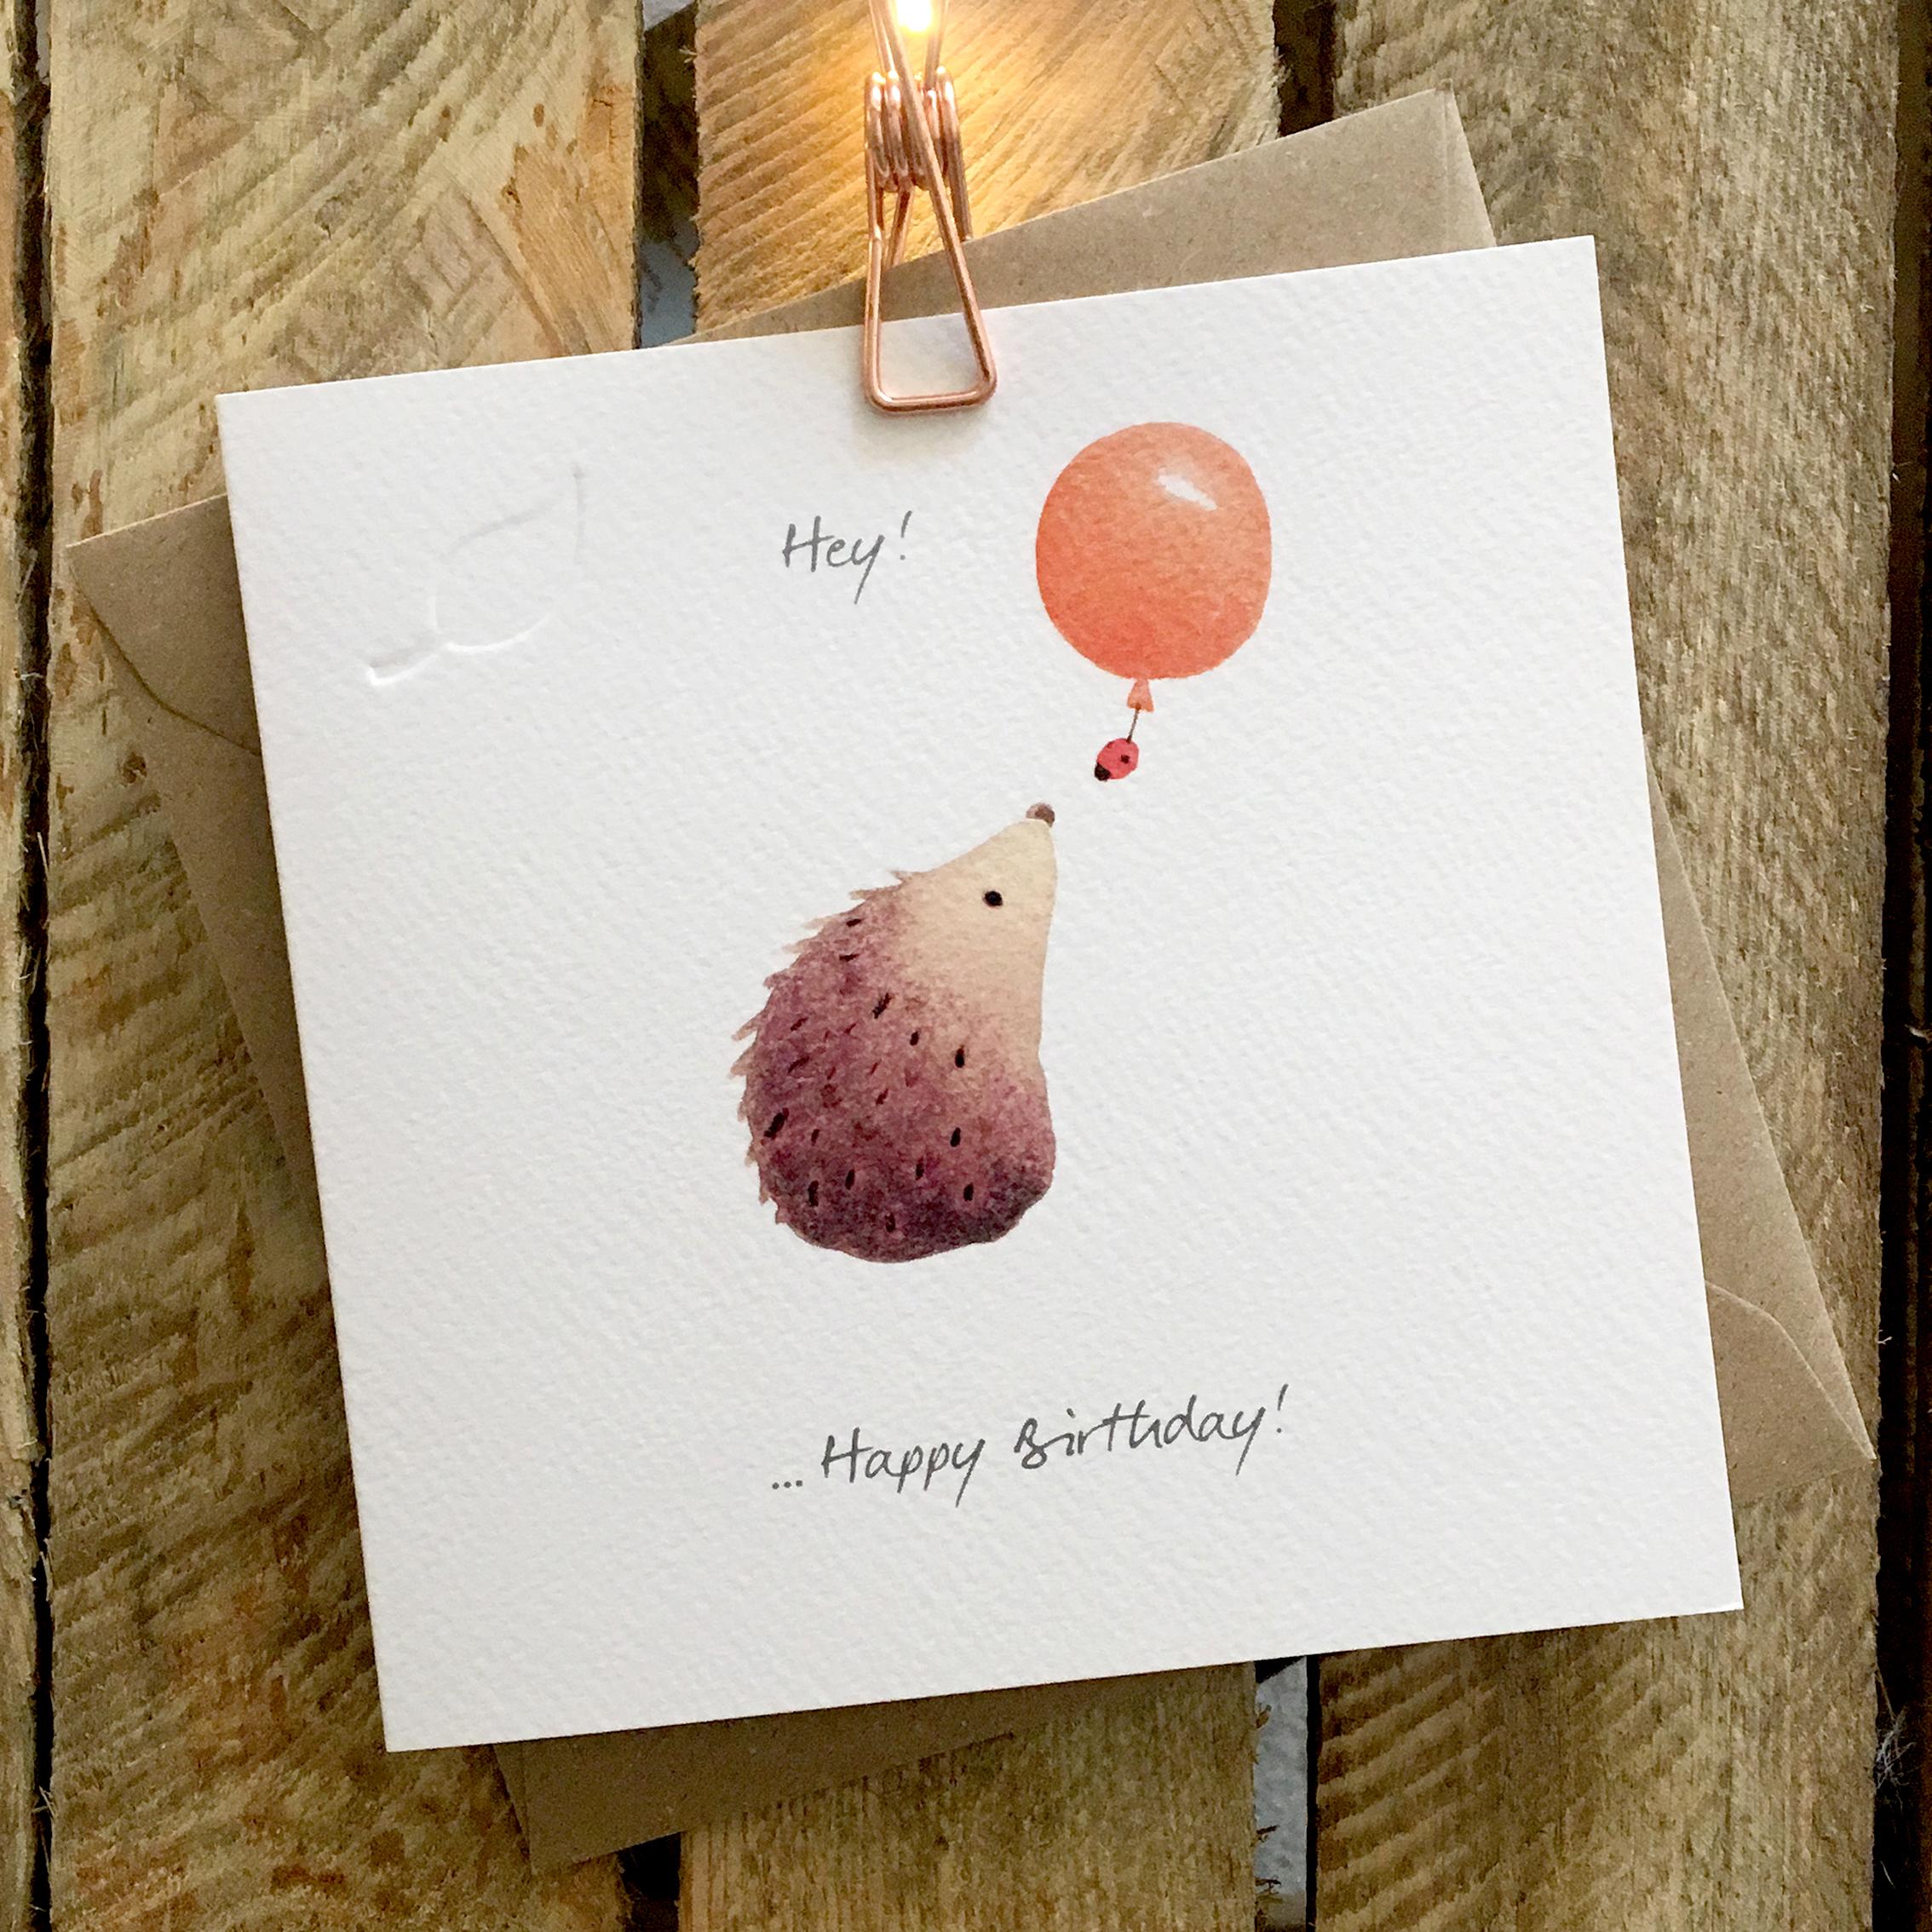 Card featuring cute hedgehog with balloon.